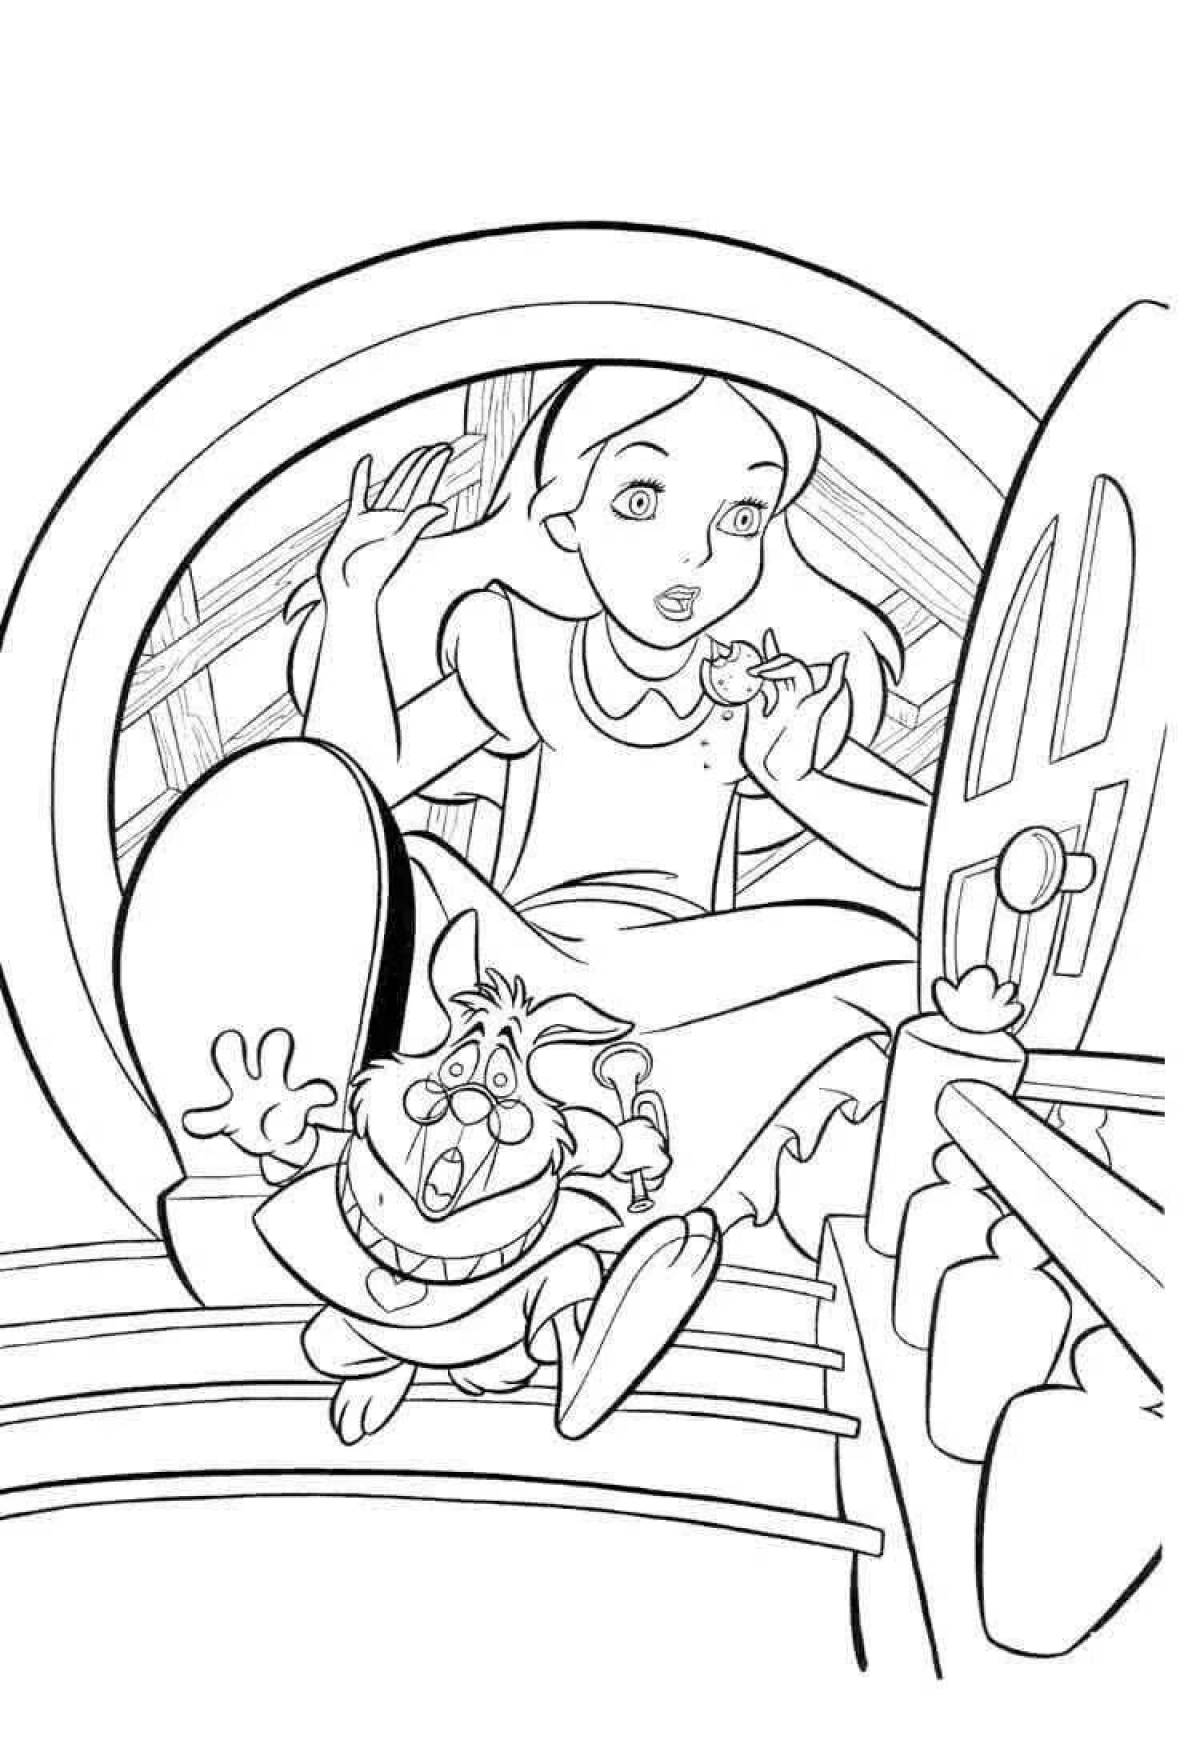 Alice's gorgeous coloring book for boys